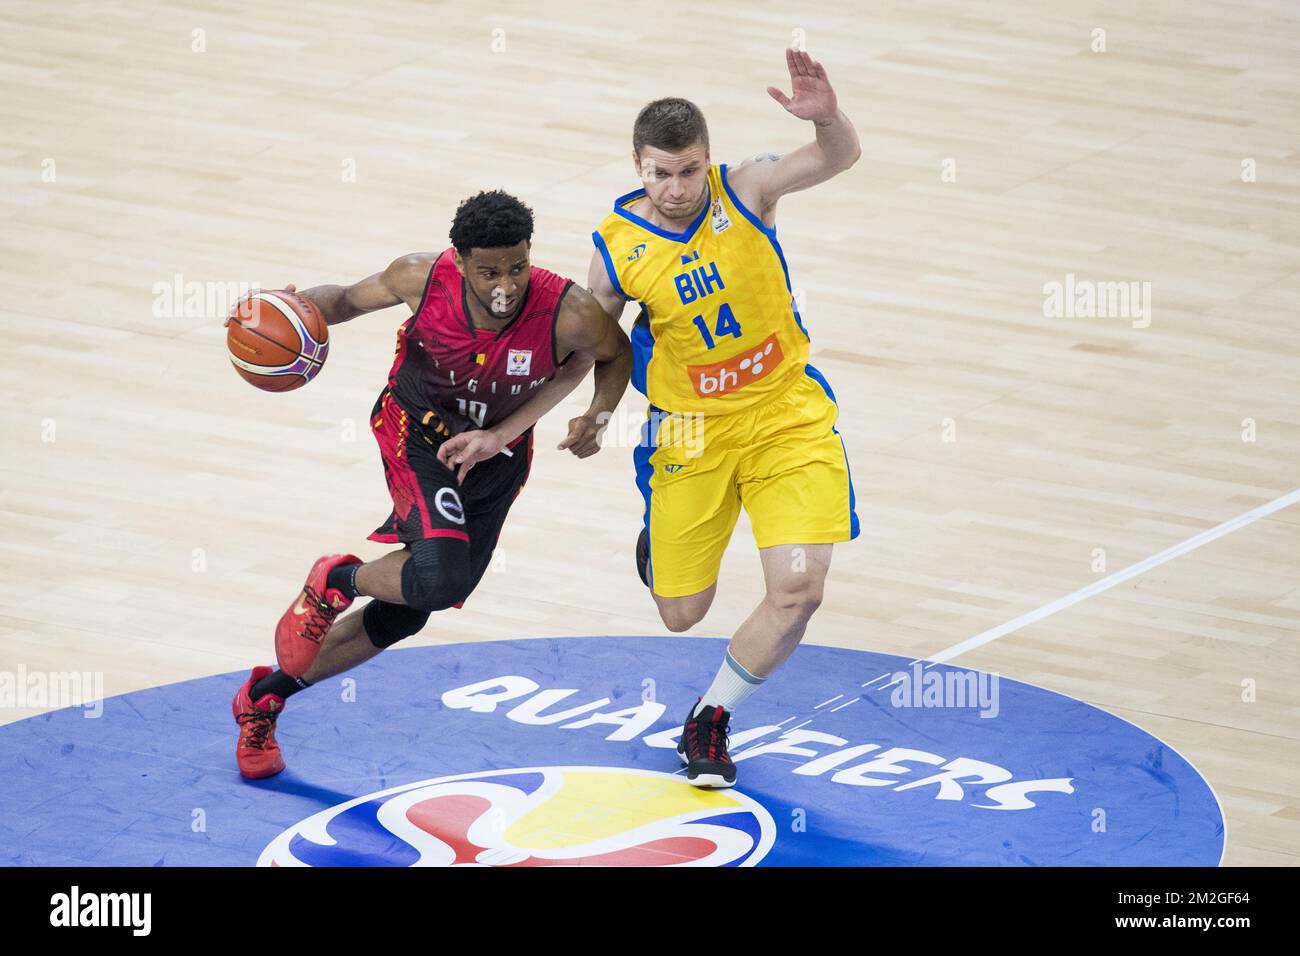 Belgium's Loic Schwartz and Bosnia's Almir Hasandic fight for the ball during basketball game between Belgium's Belgian Lions and Bosnia & Herzegovina, the sixth and last qualification game for world cup 2019 in the group E, Monday 02 July 2018 in Merksem, Antwerp. BELGA PHOTO JASPER JACOBS Stock Photo